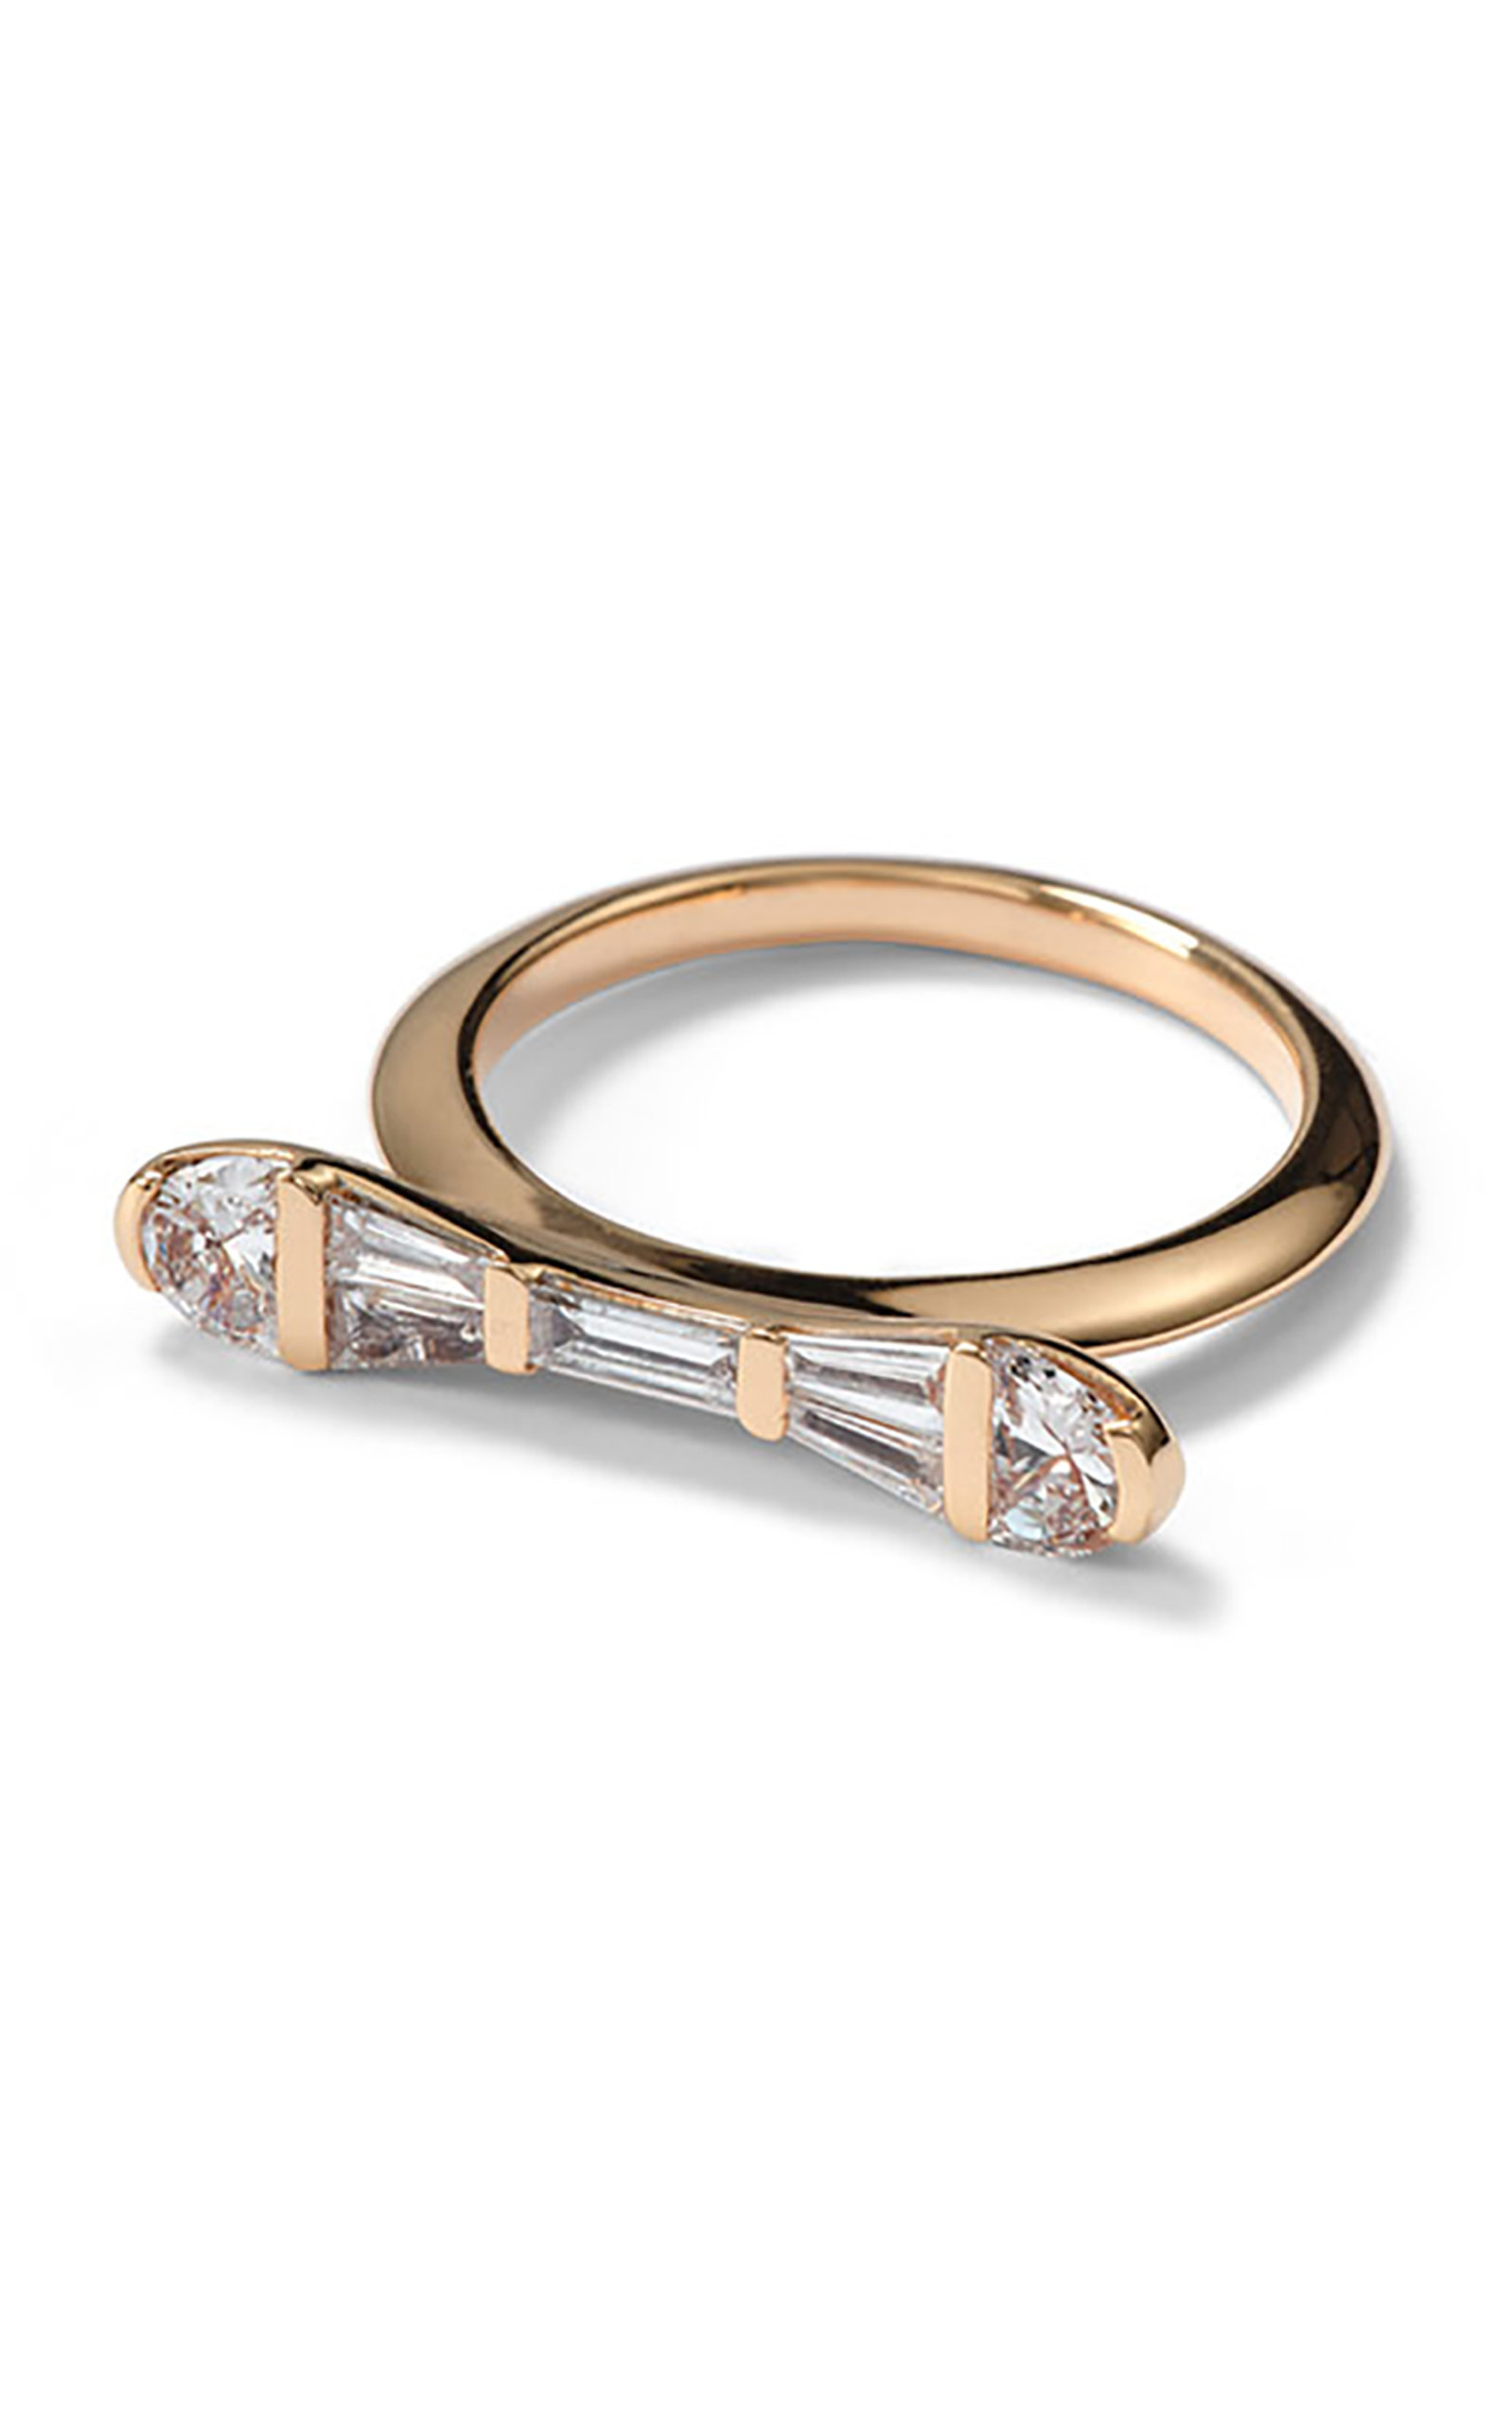 Nak Armstrong 20k Rose Gold Baton Ring With White Diamonds In Rg